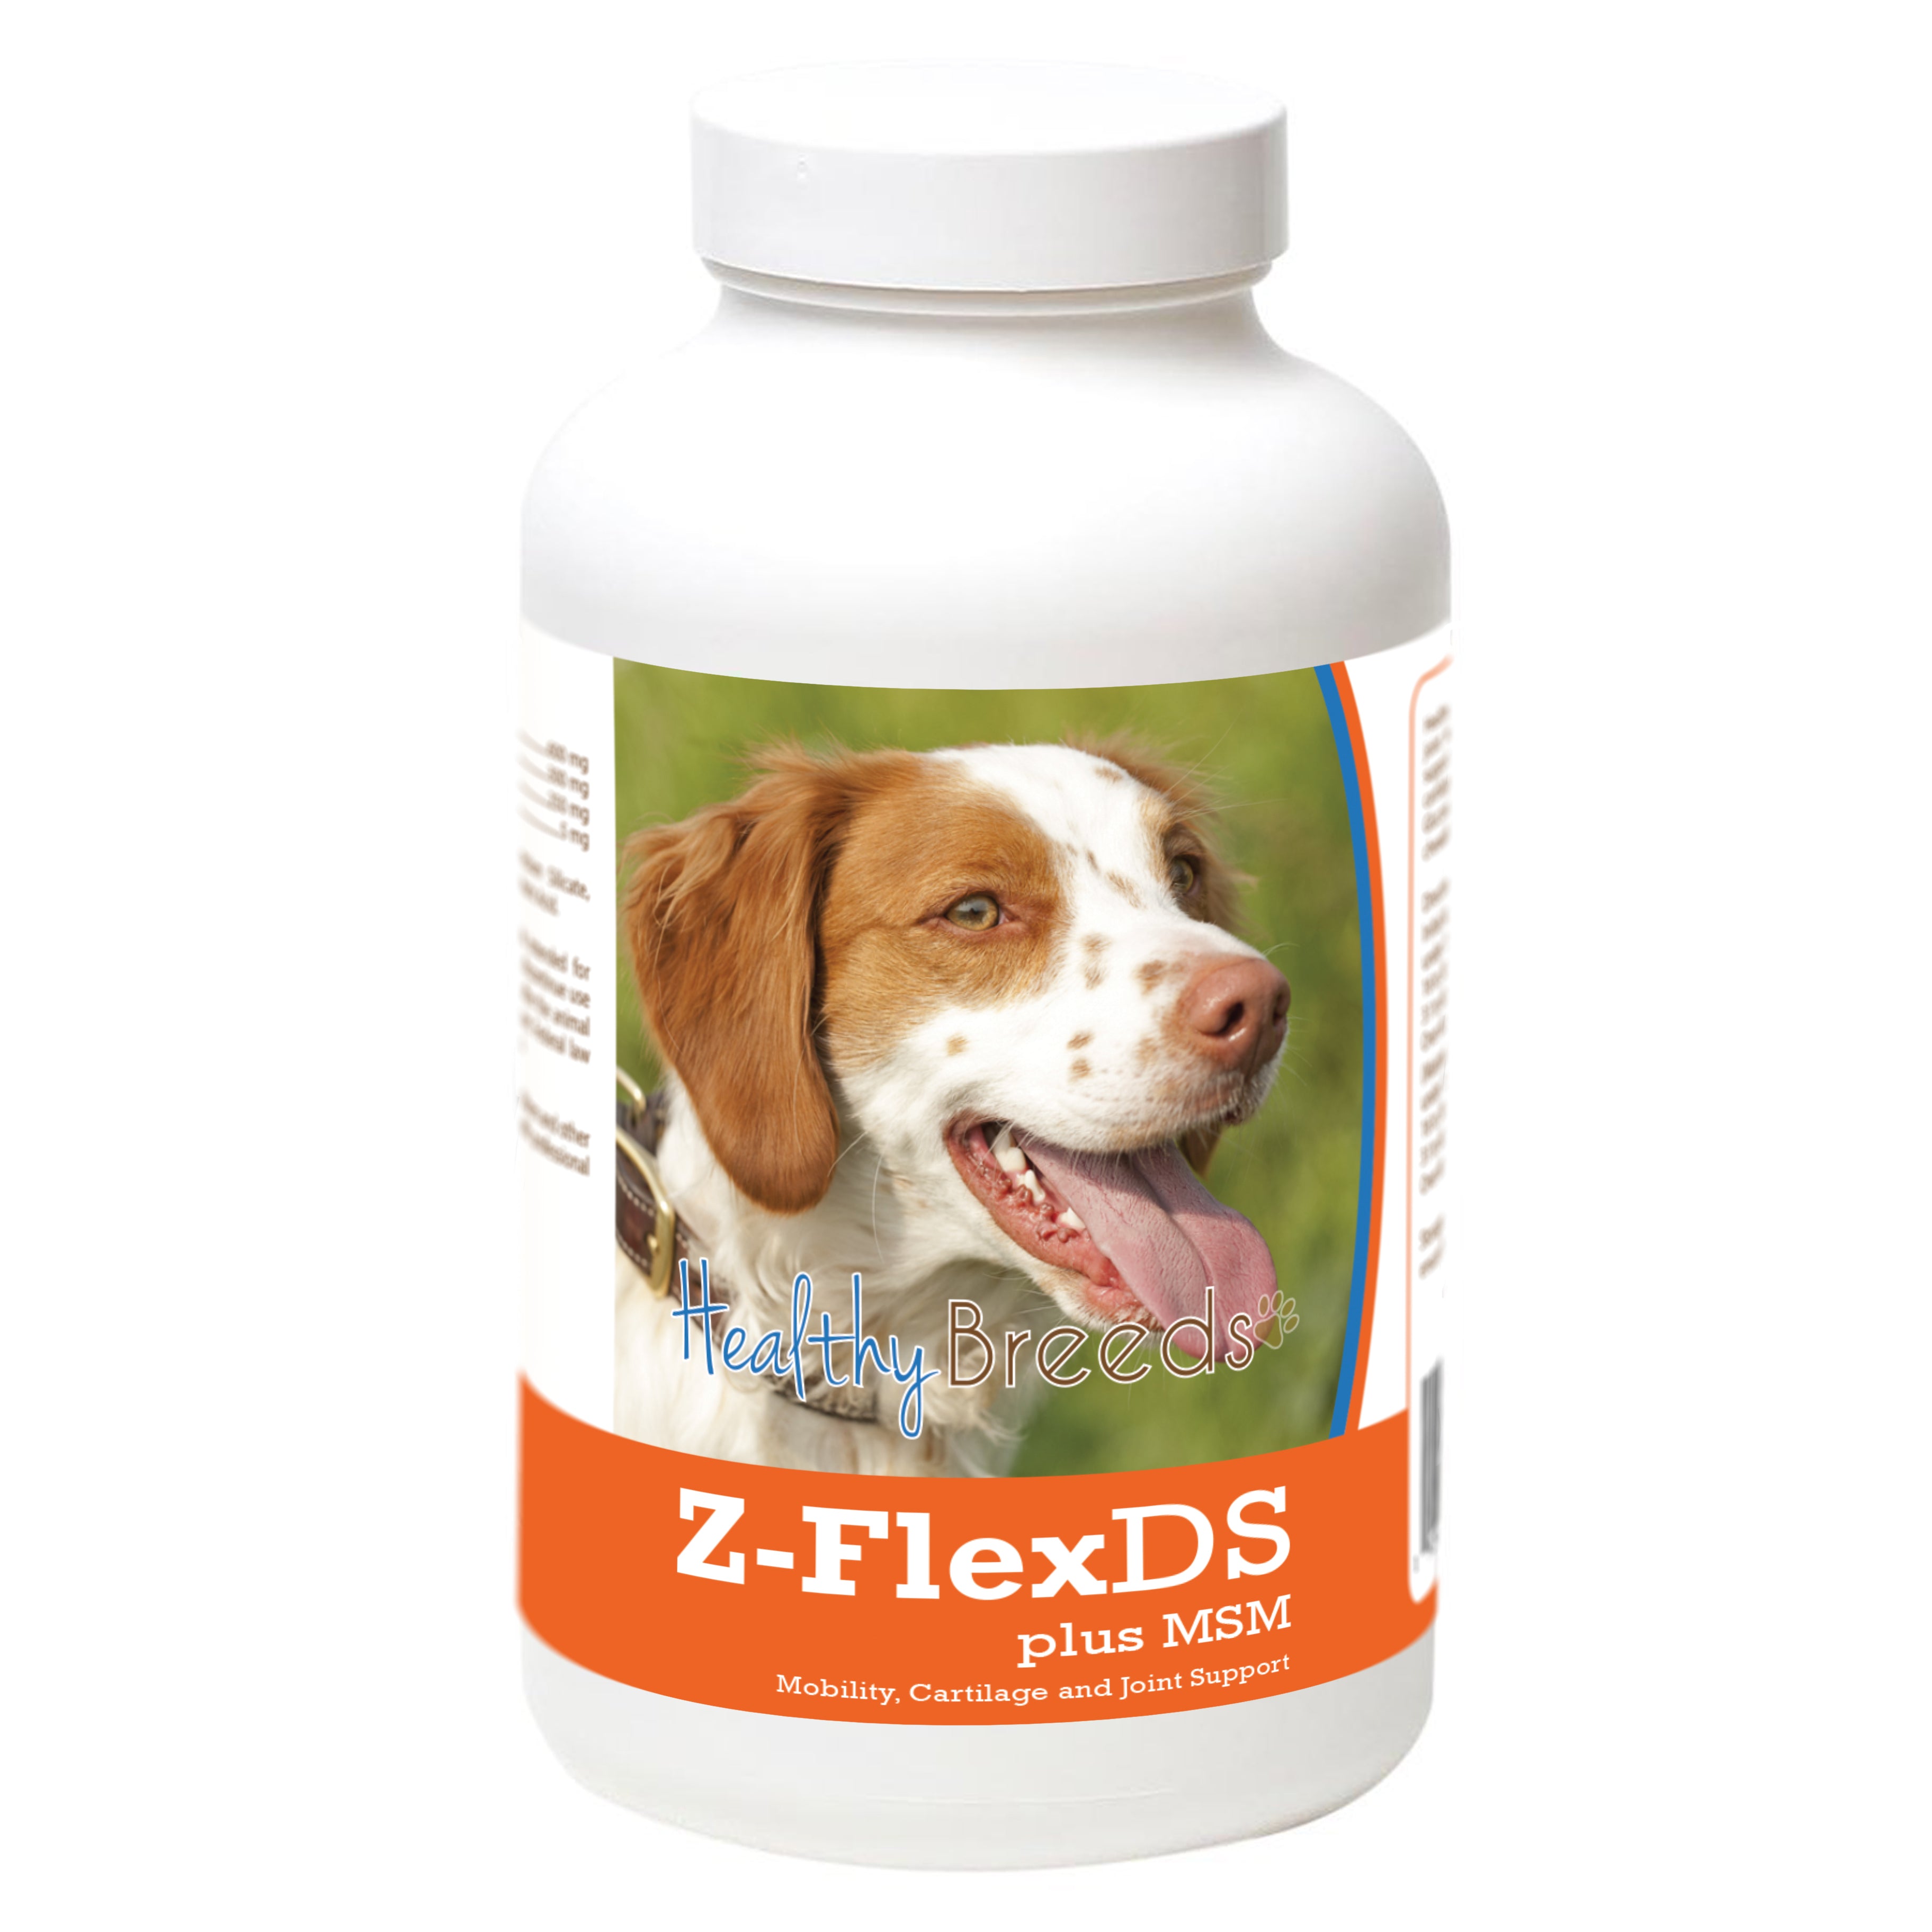 Brittany Z-FlexDS plus MSM Chewable Tablets 60 Count